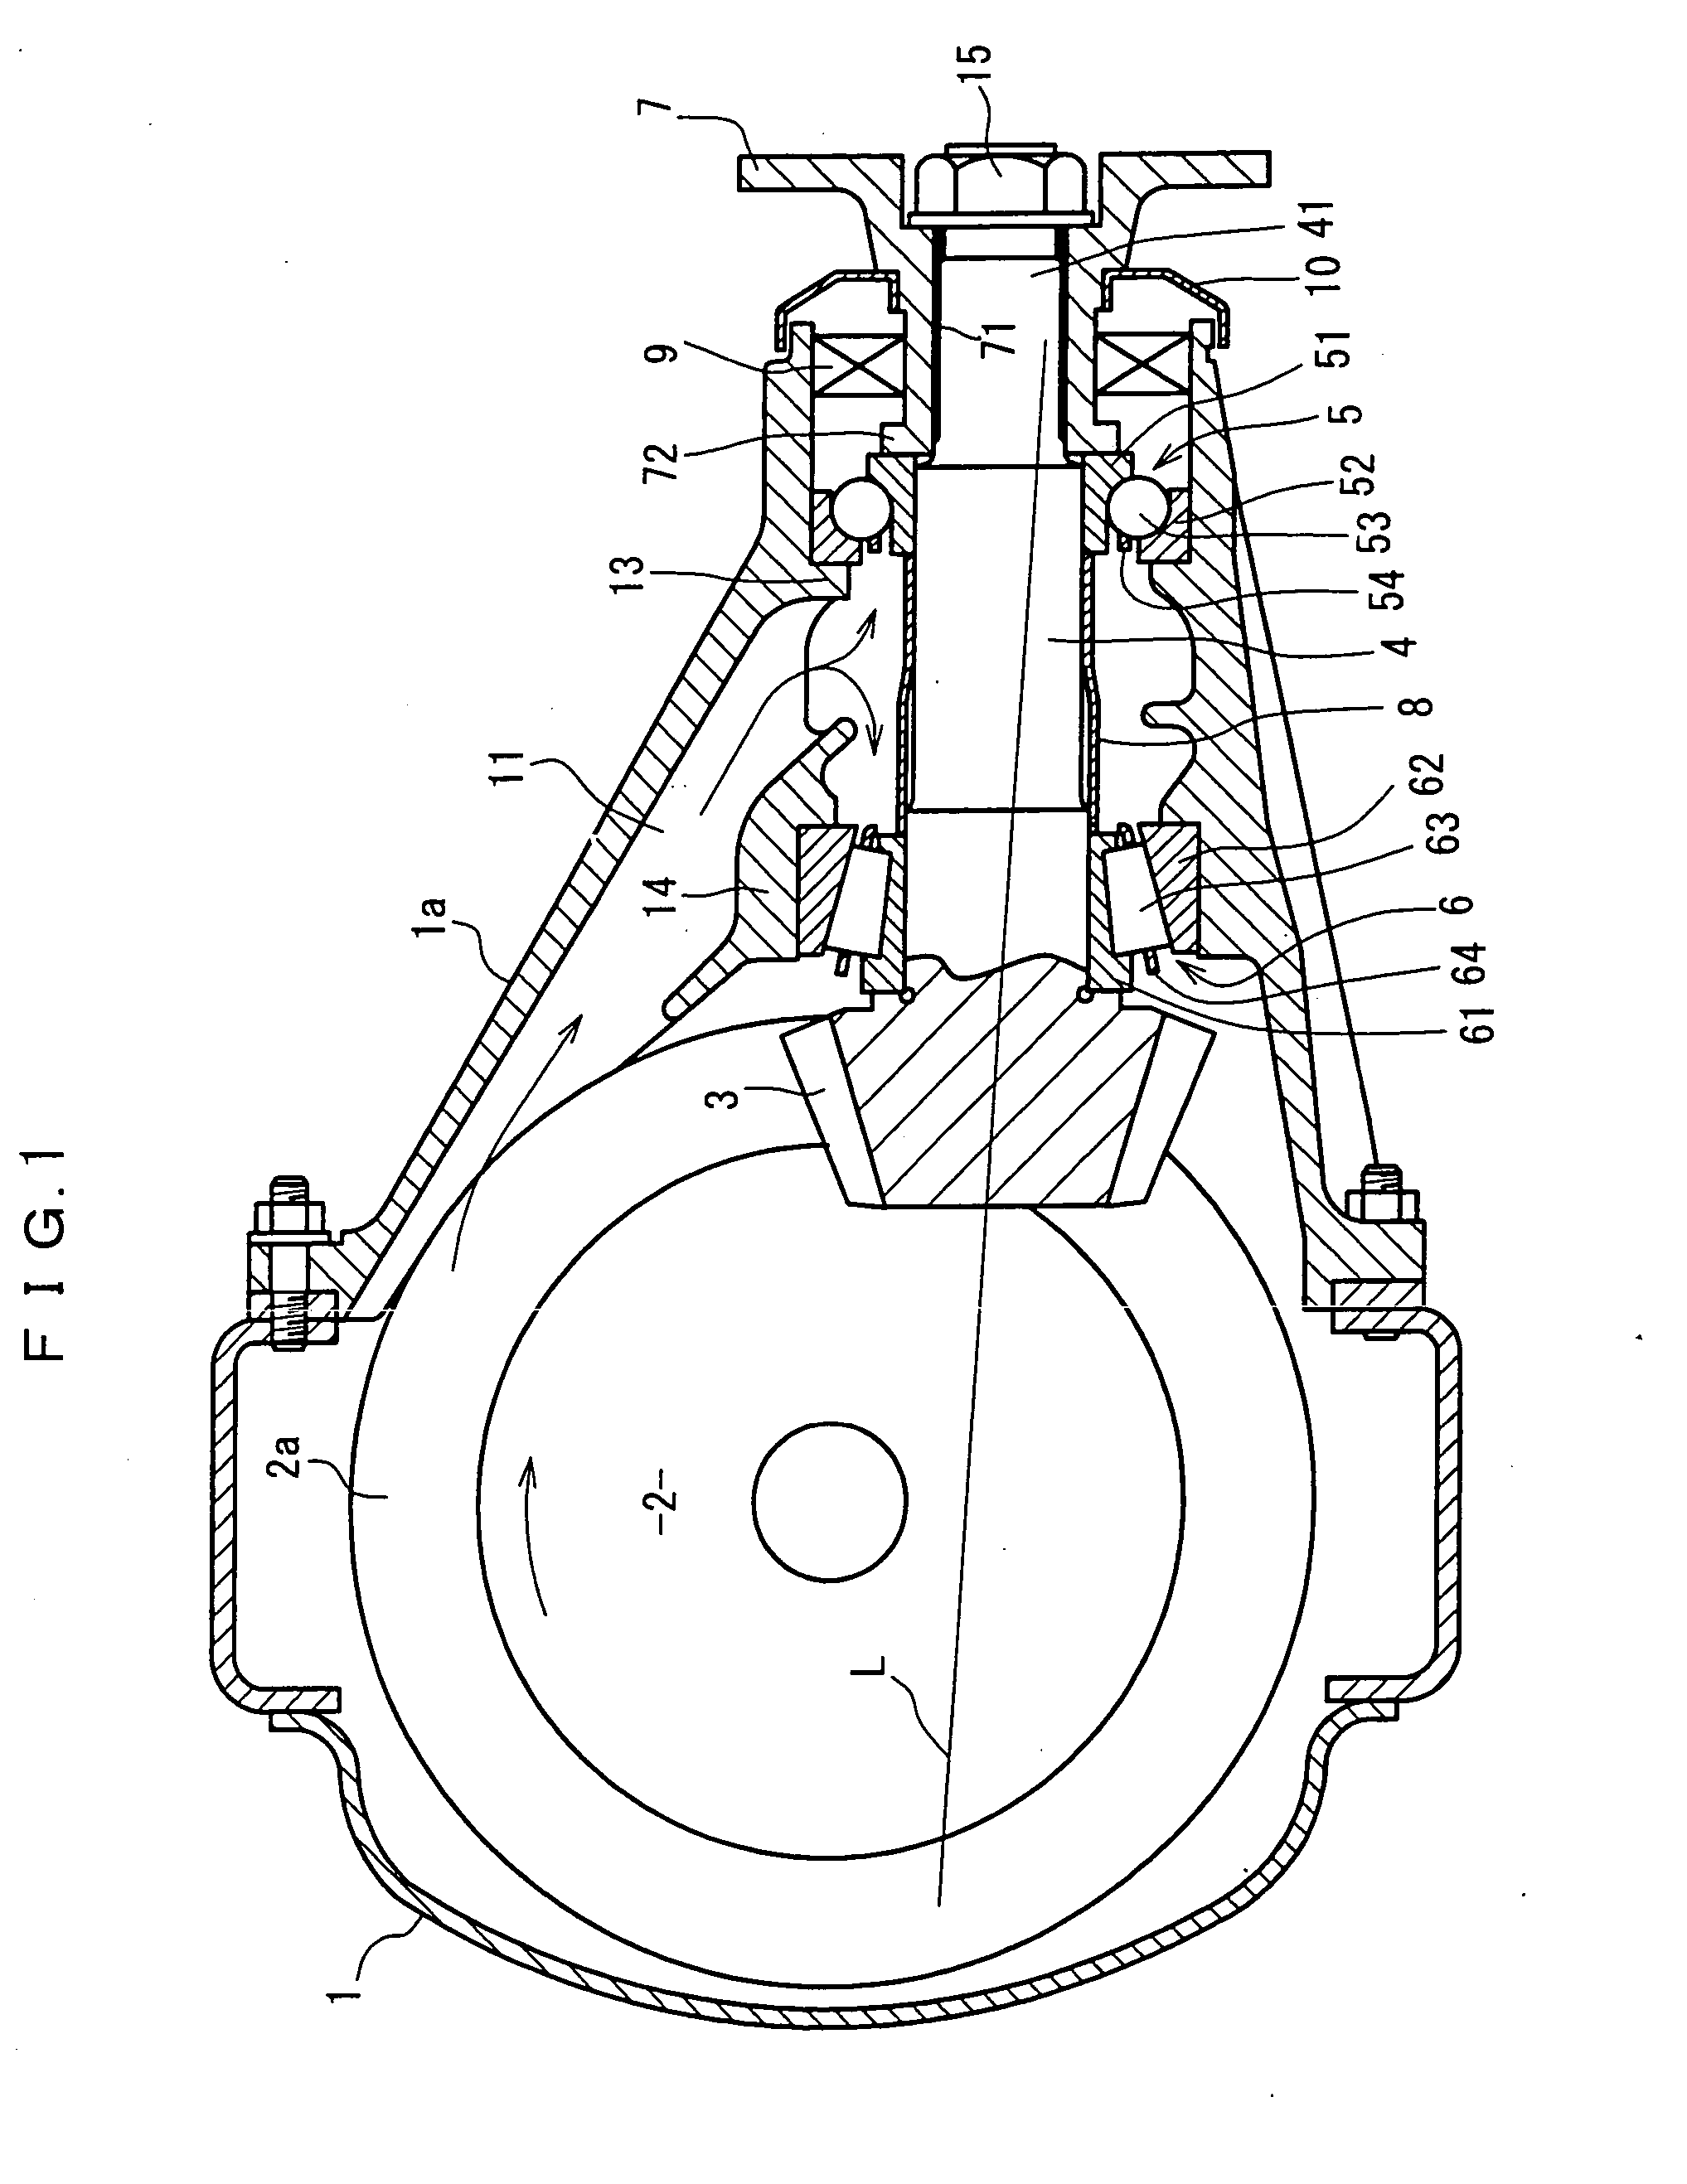 Bearing apparatus for supporting pinion shaft